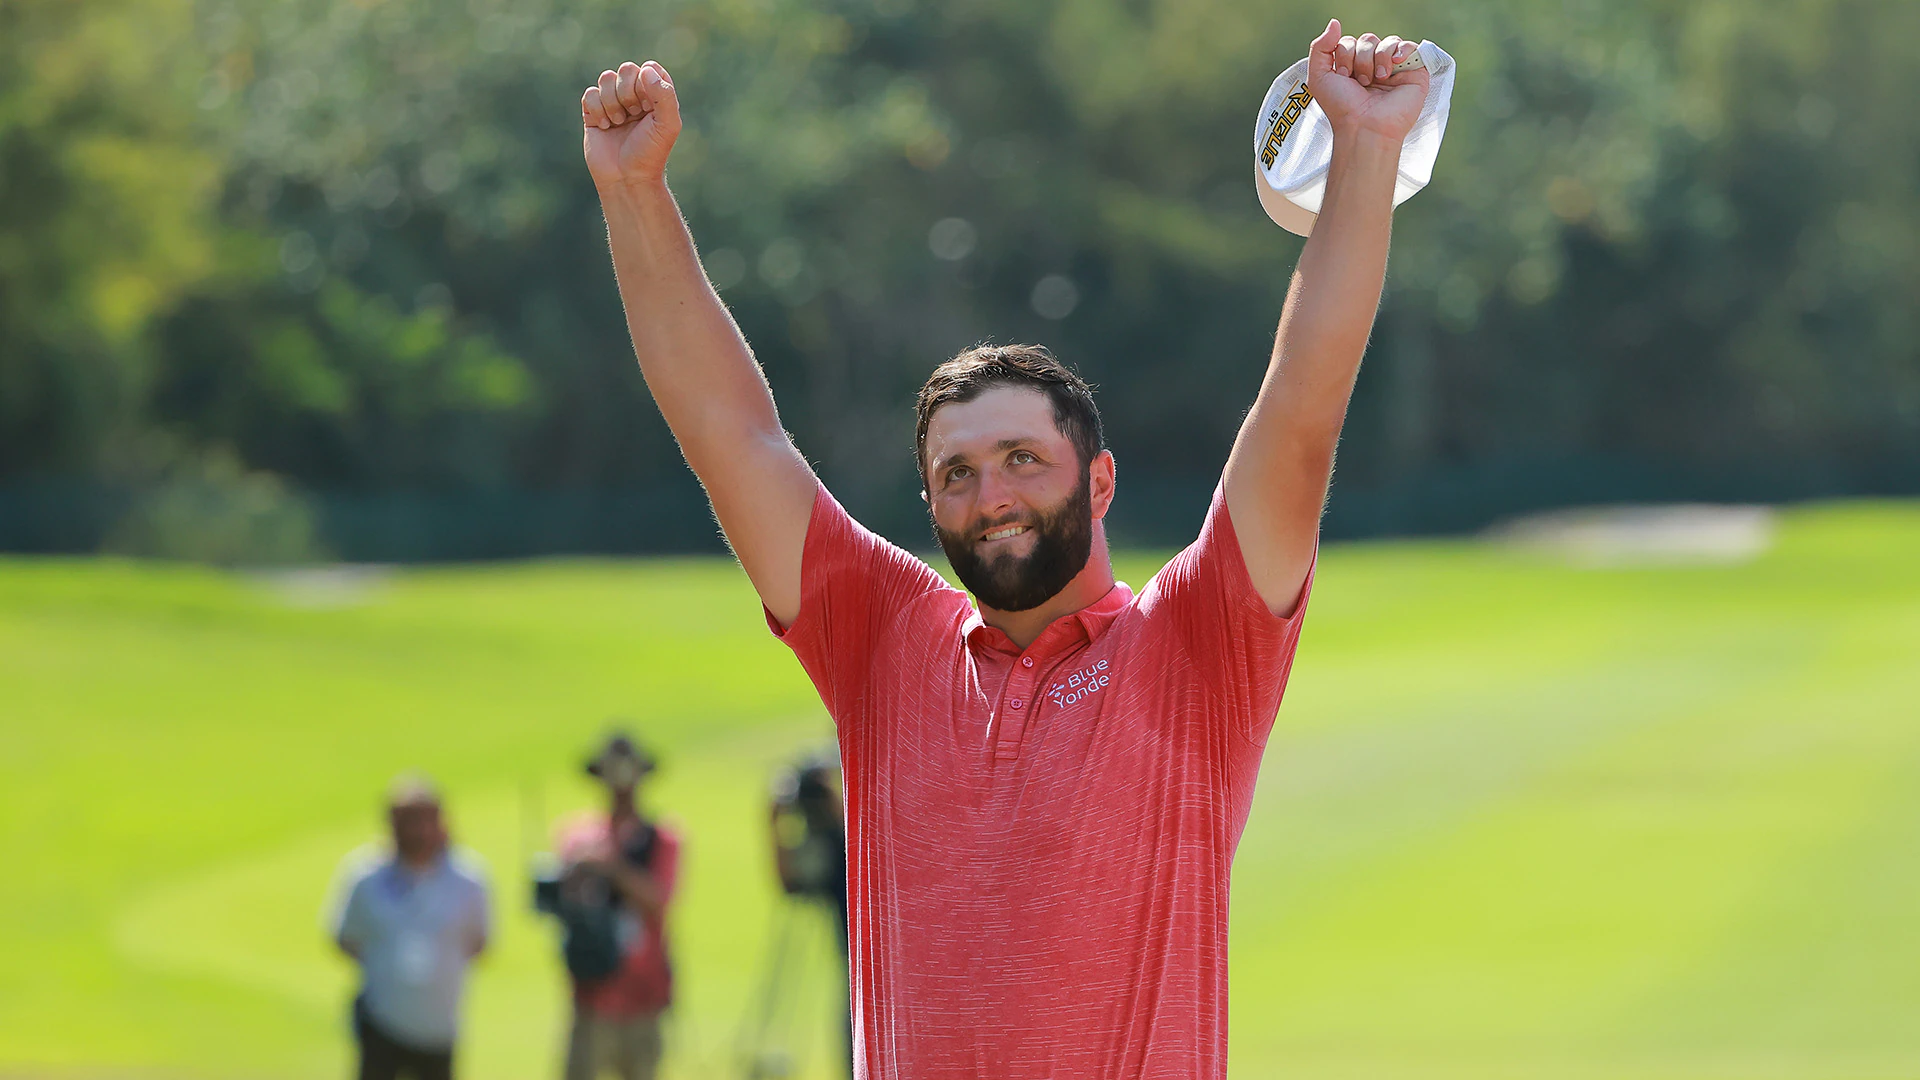 Jon Rahm back in winner’s circle after wire-to-wire victory in Mexico